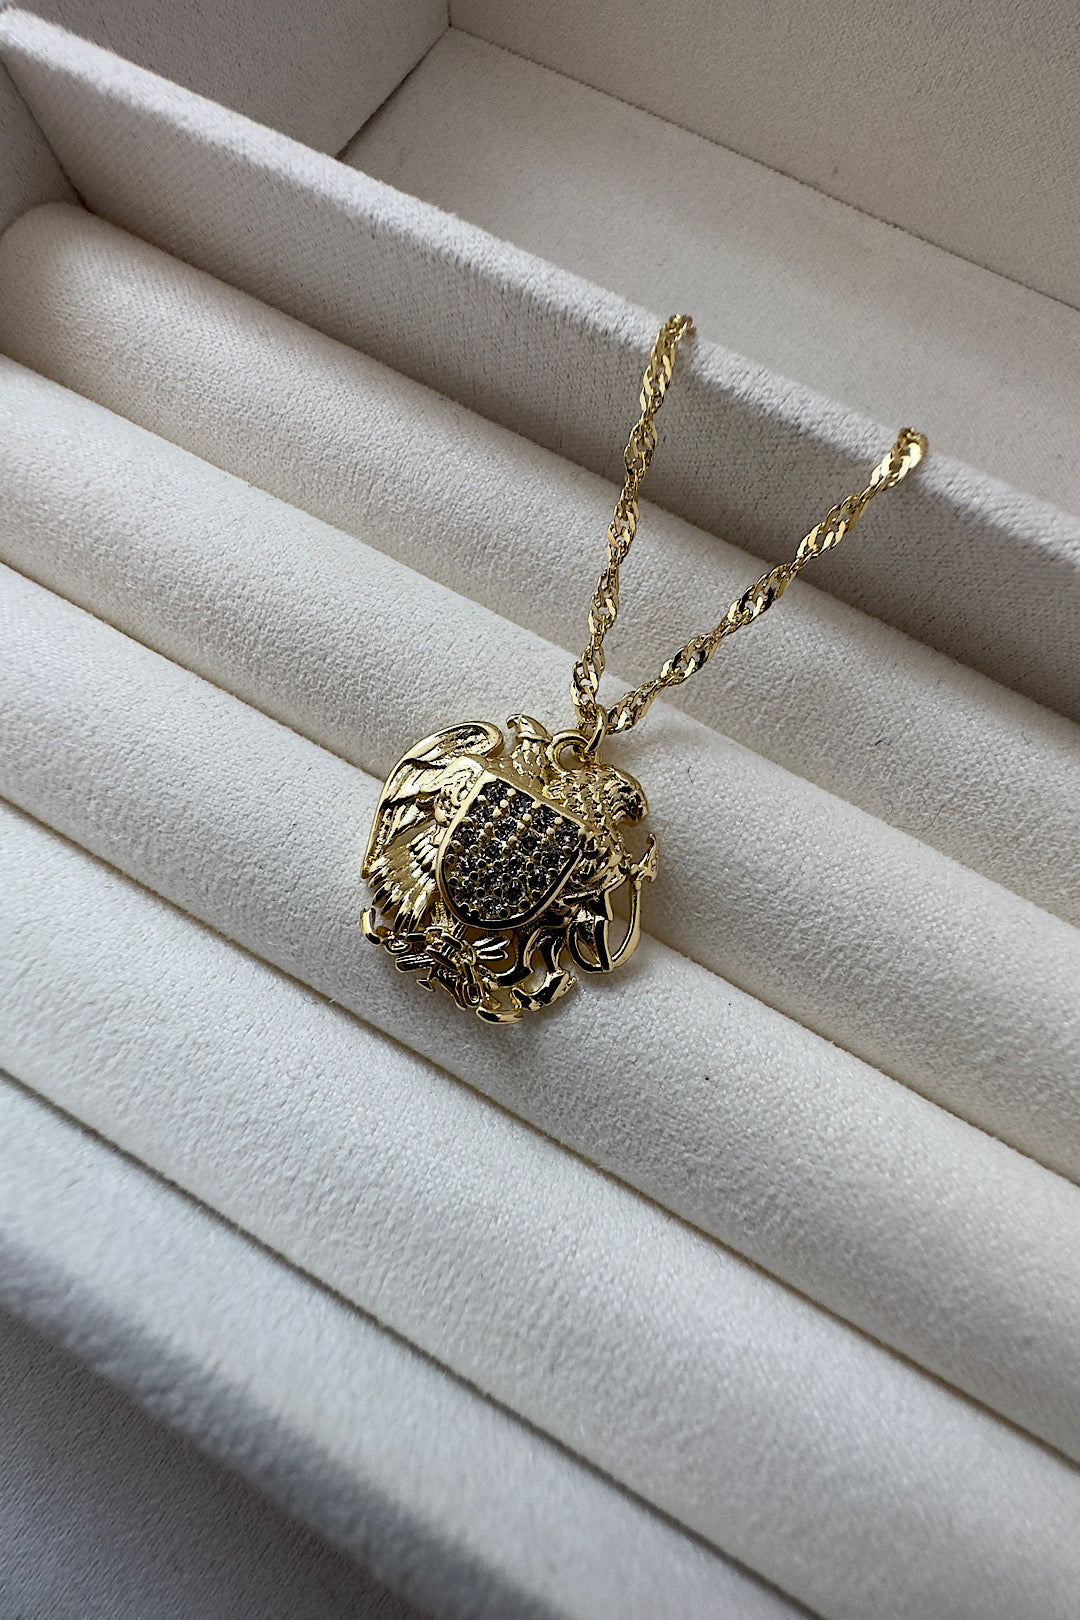 Armenia Coat of Arms Gold Swirl Necklace 